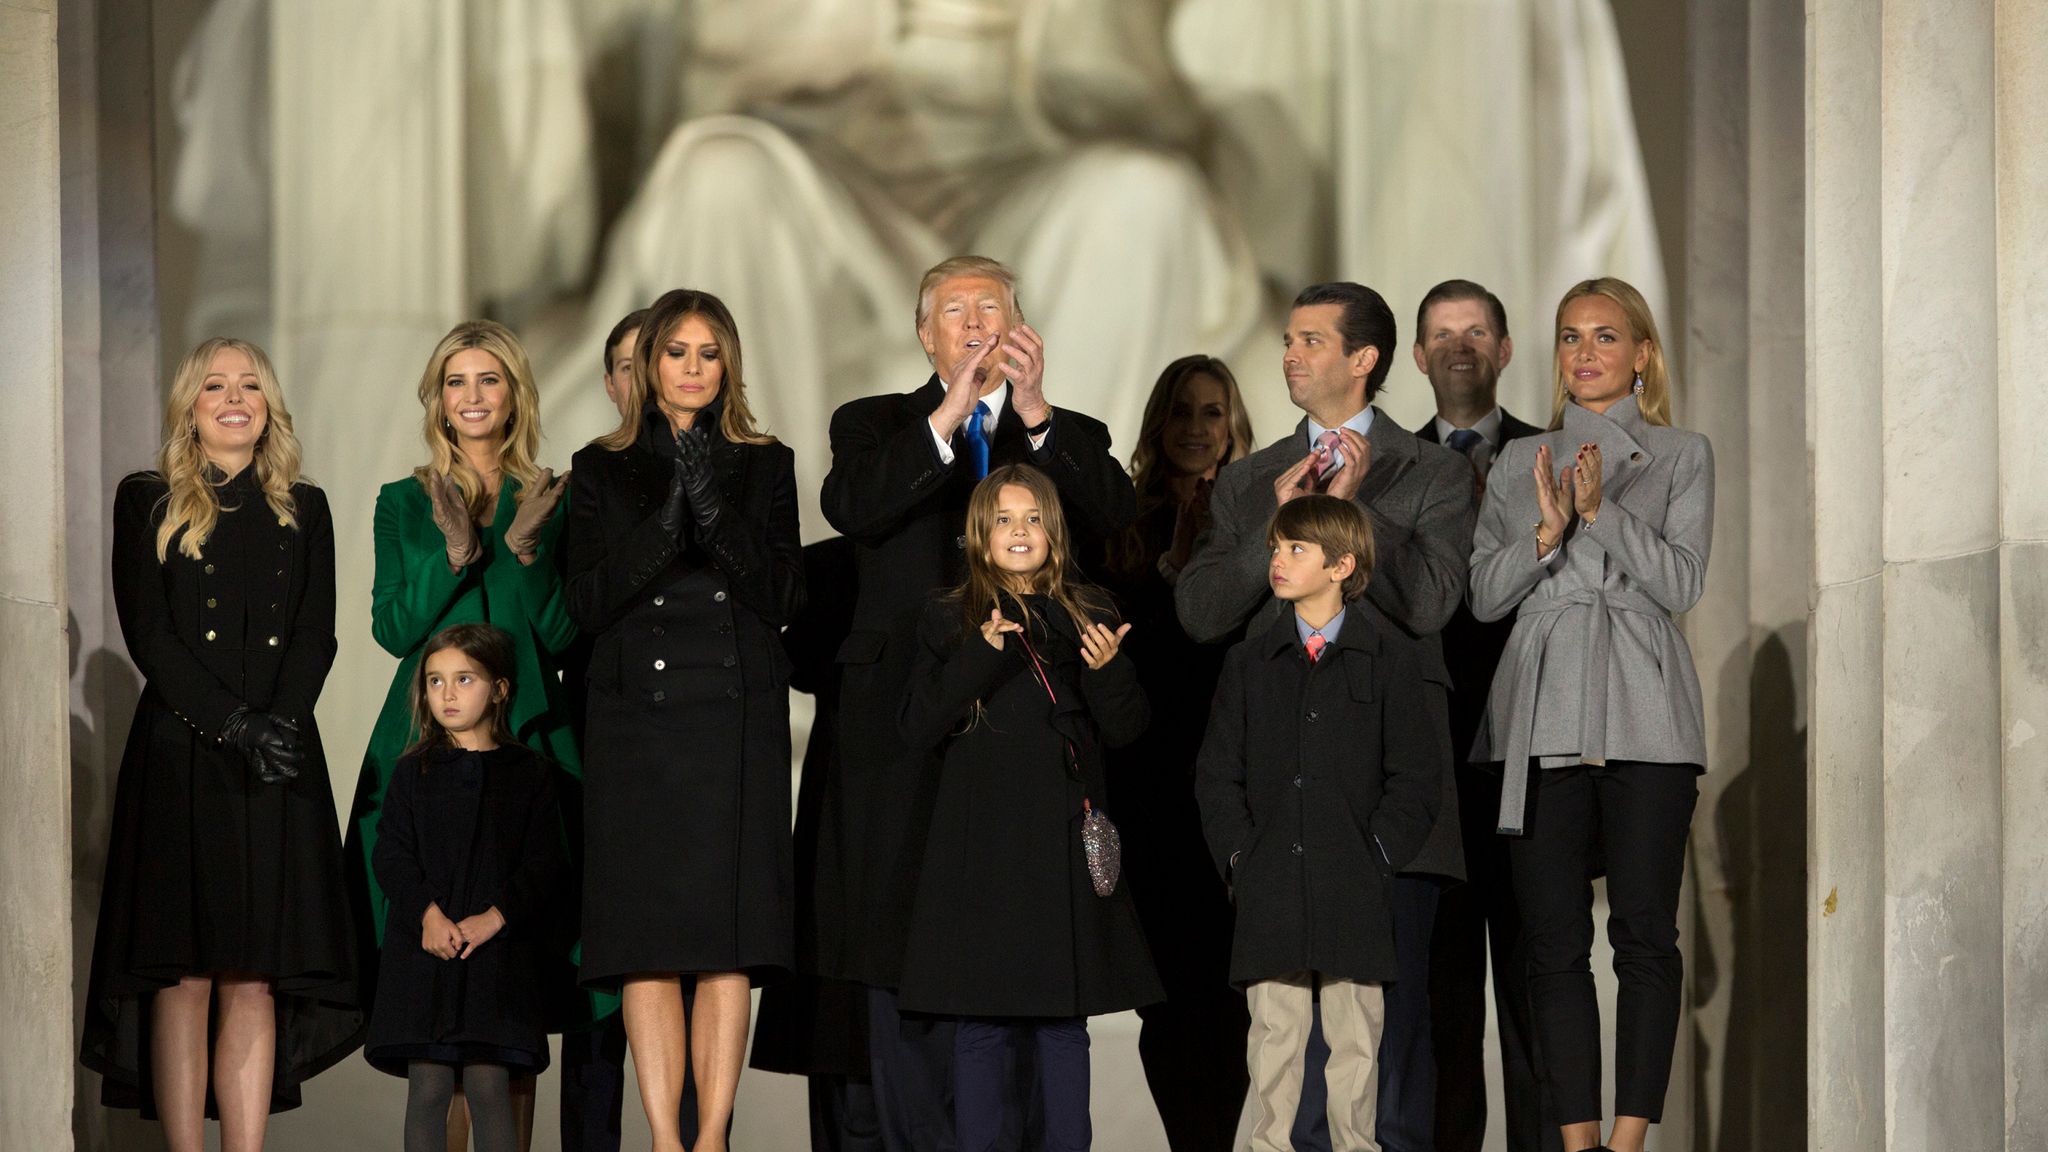 What Trump's Family Wore to the Inauguration